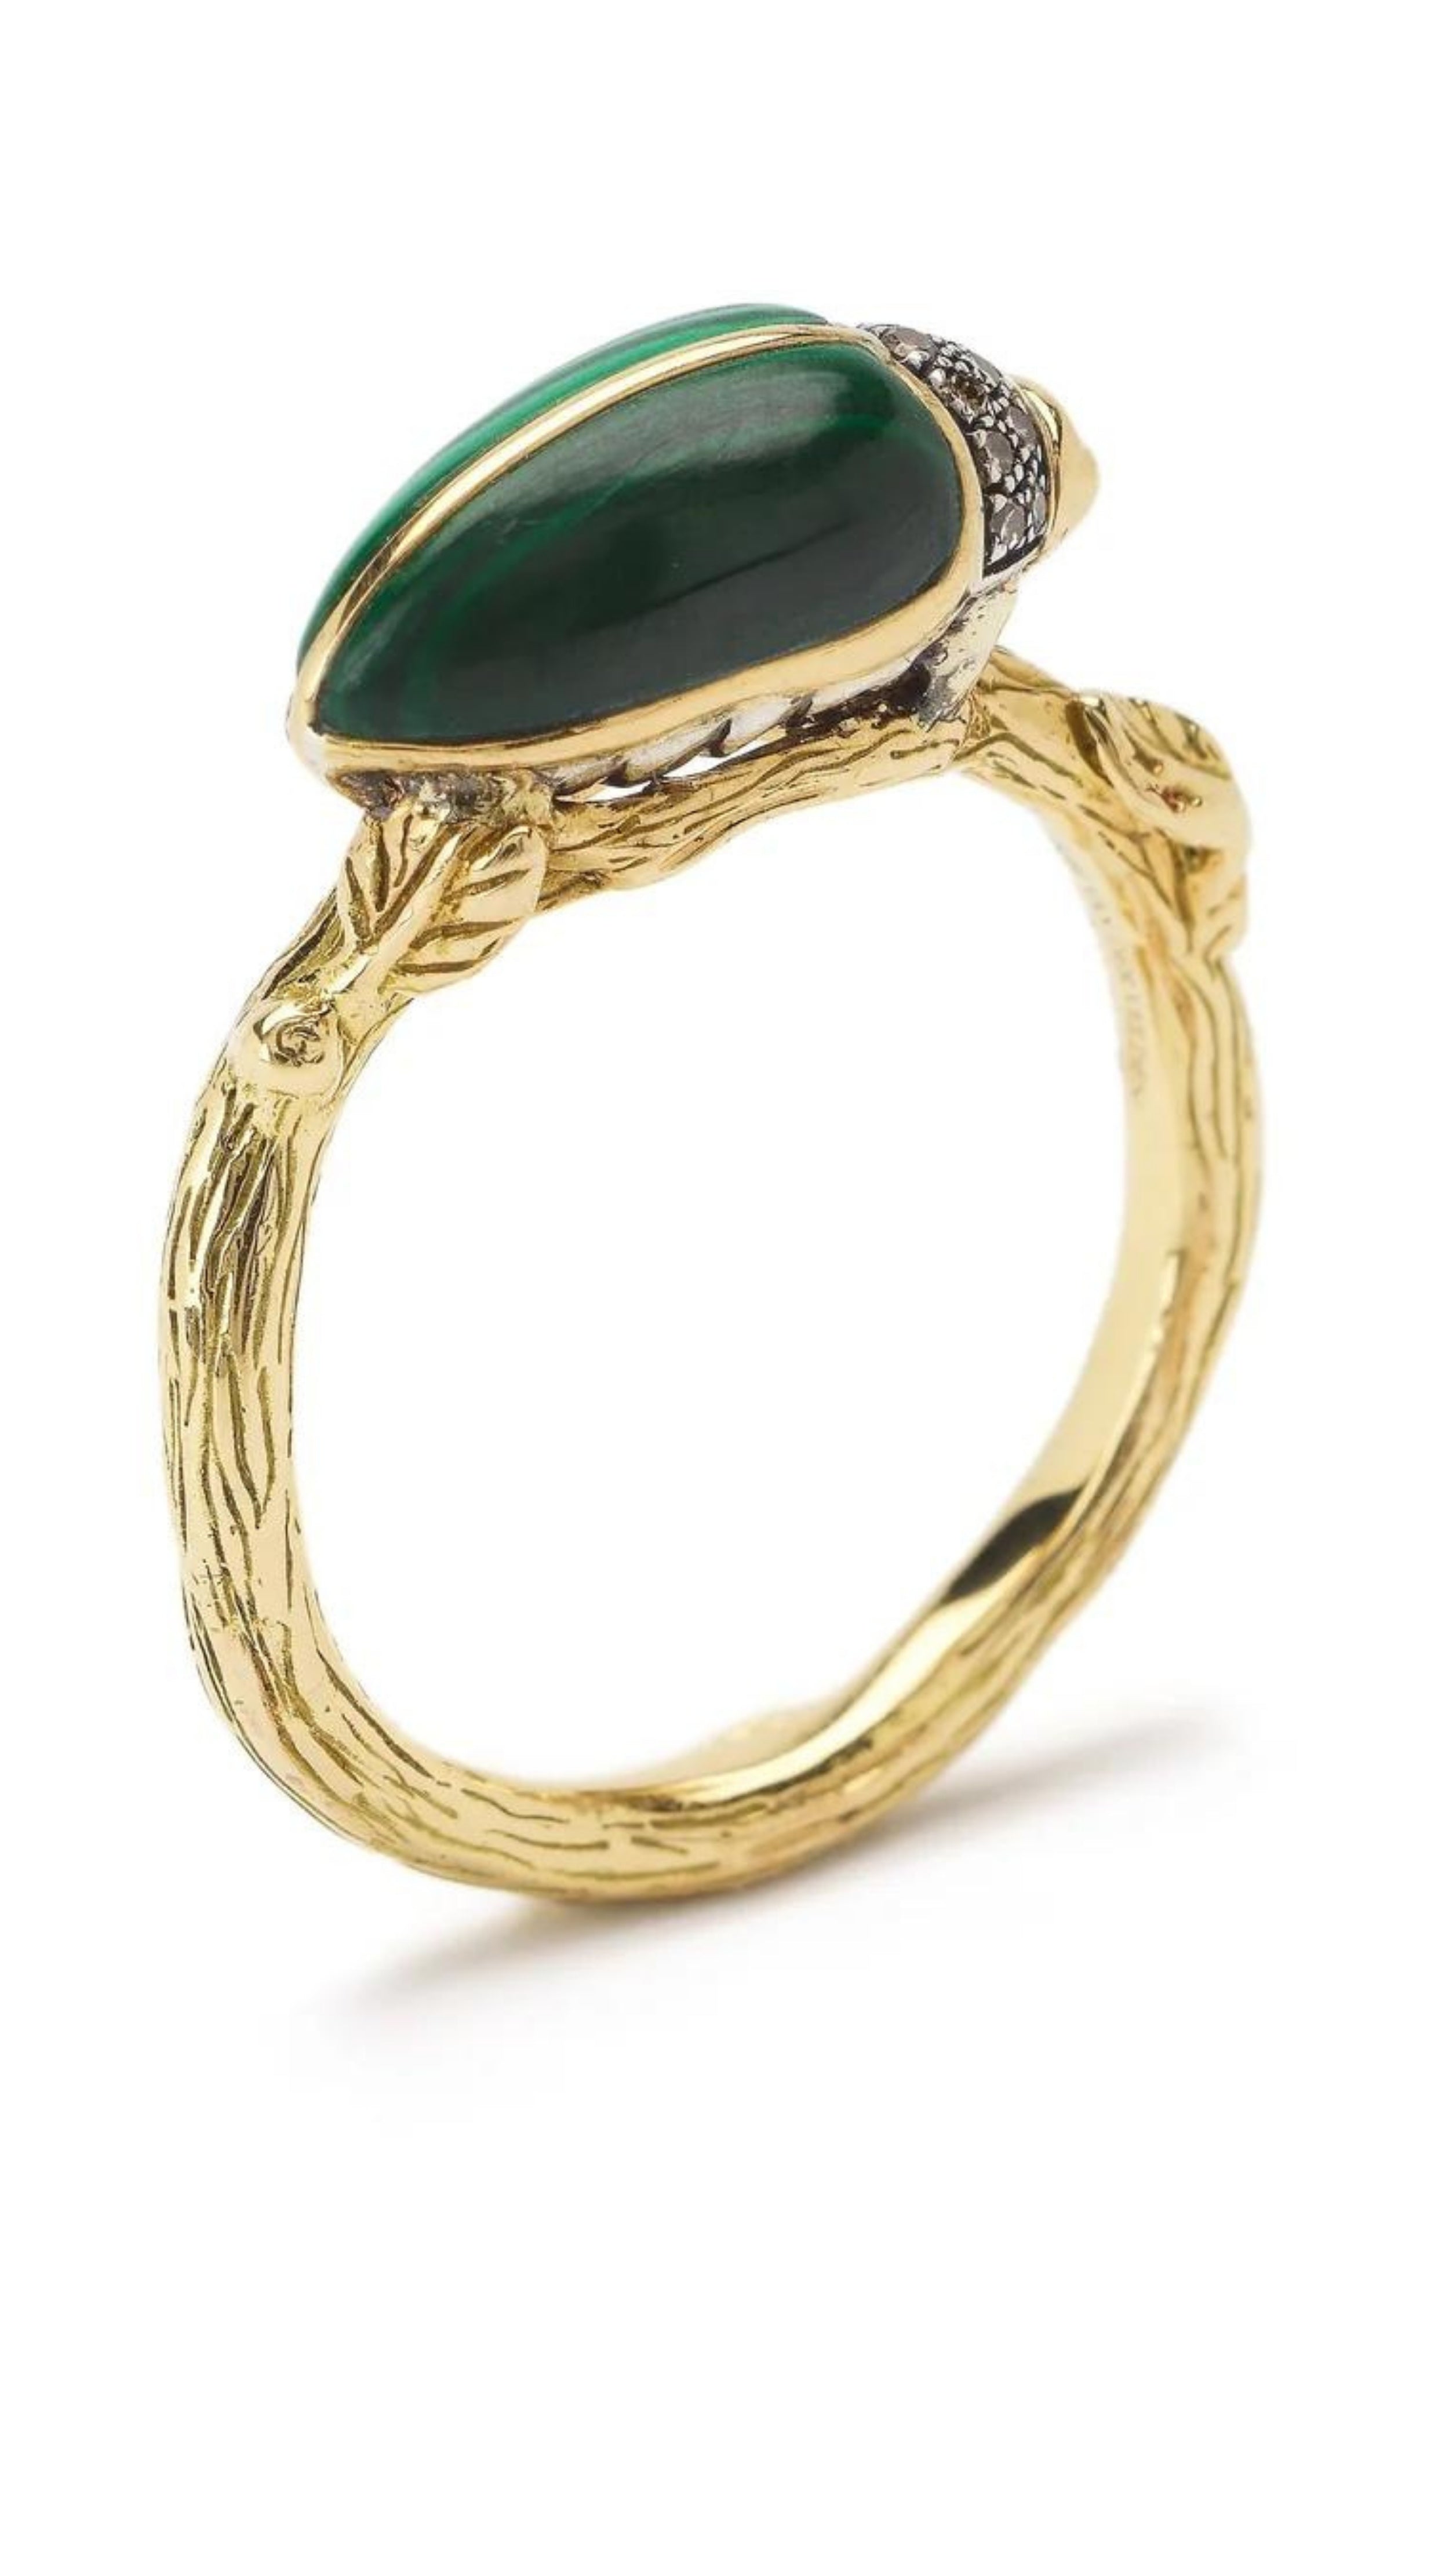 Bibi van der Velden Malachite Scarab Ring Made in 18K yellow gold and sterling silver, this ring textured branch design and a carved Malachite scarab beetle on top. Shown from back and side angle.